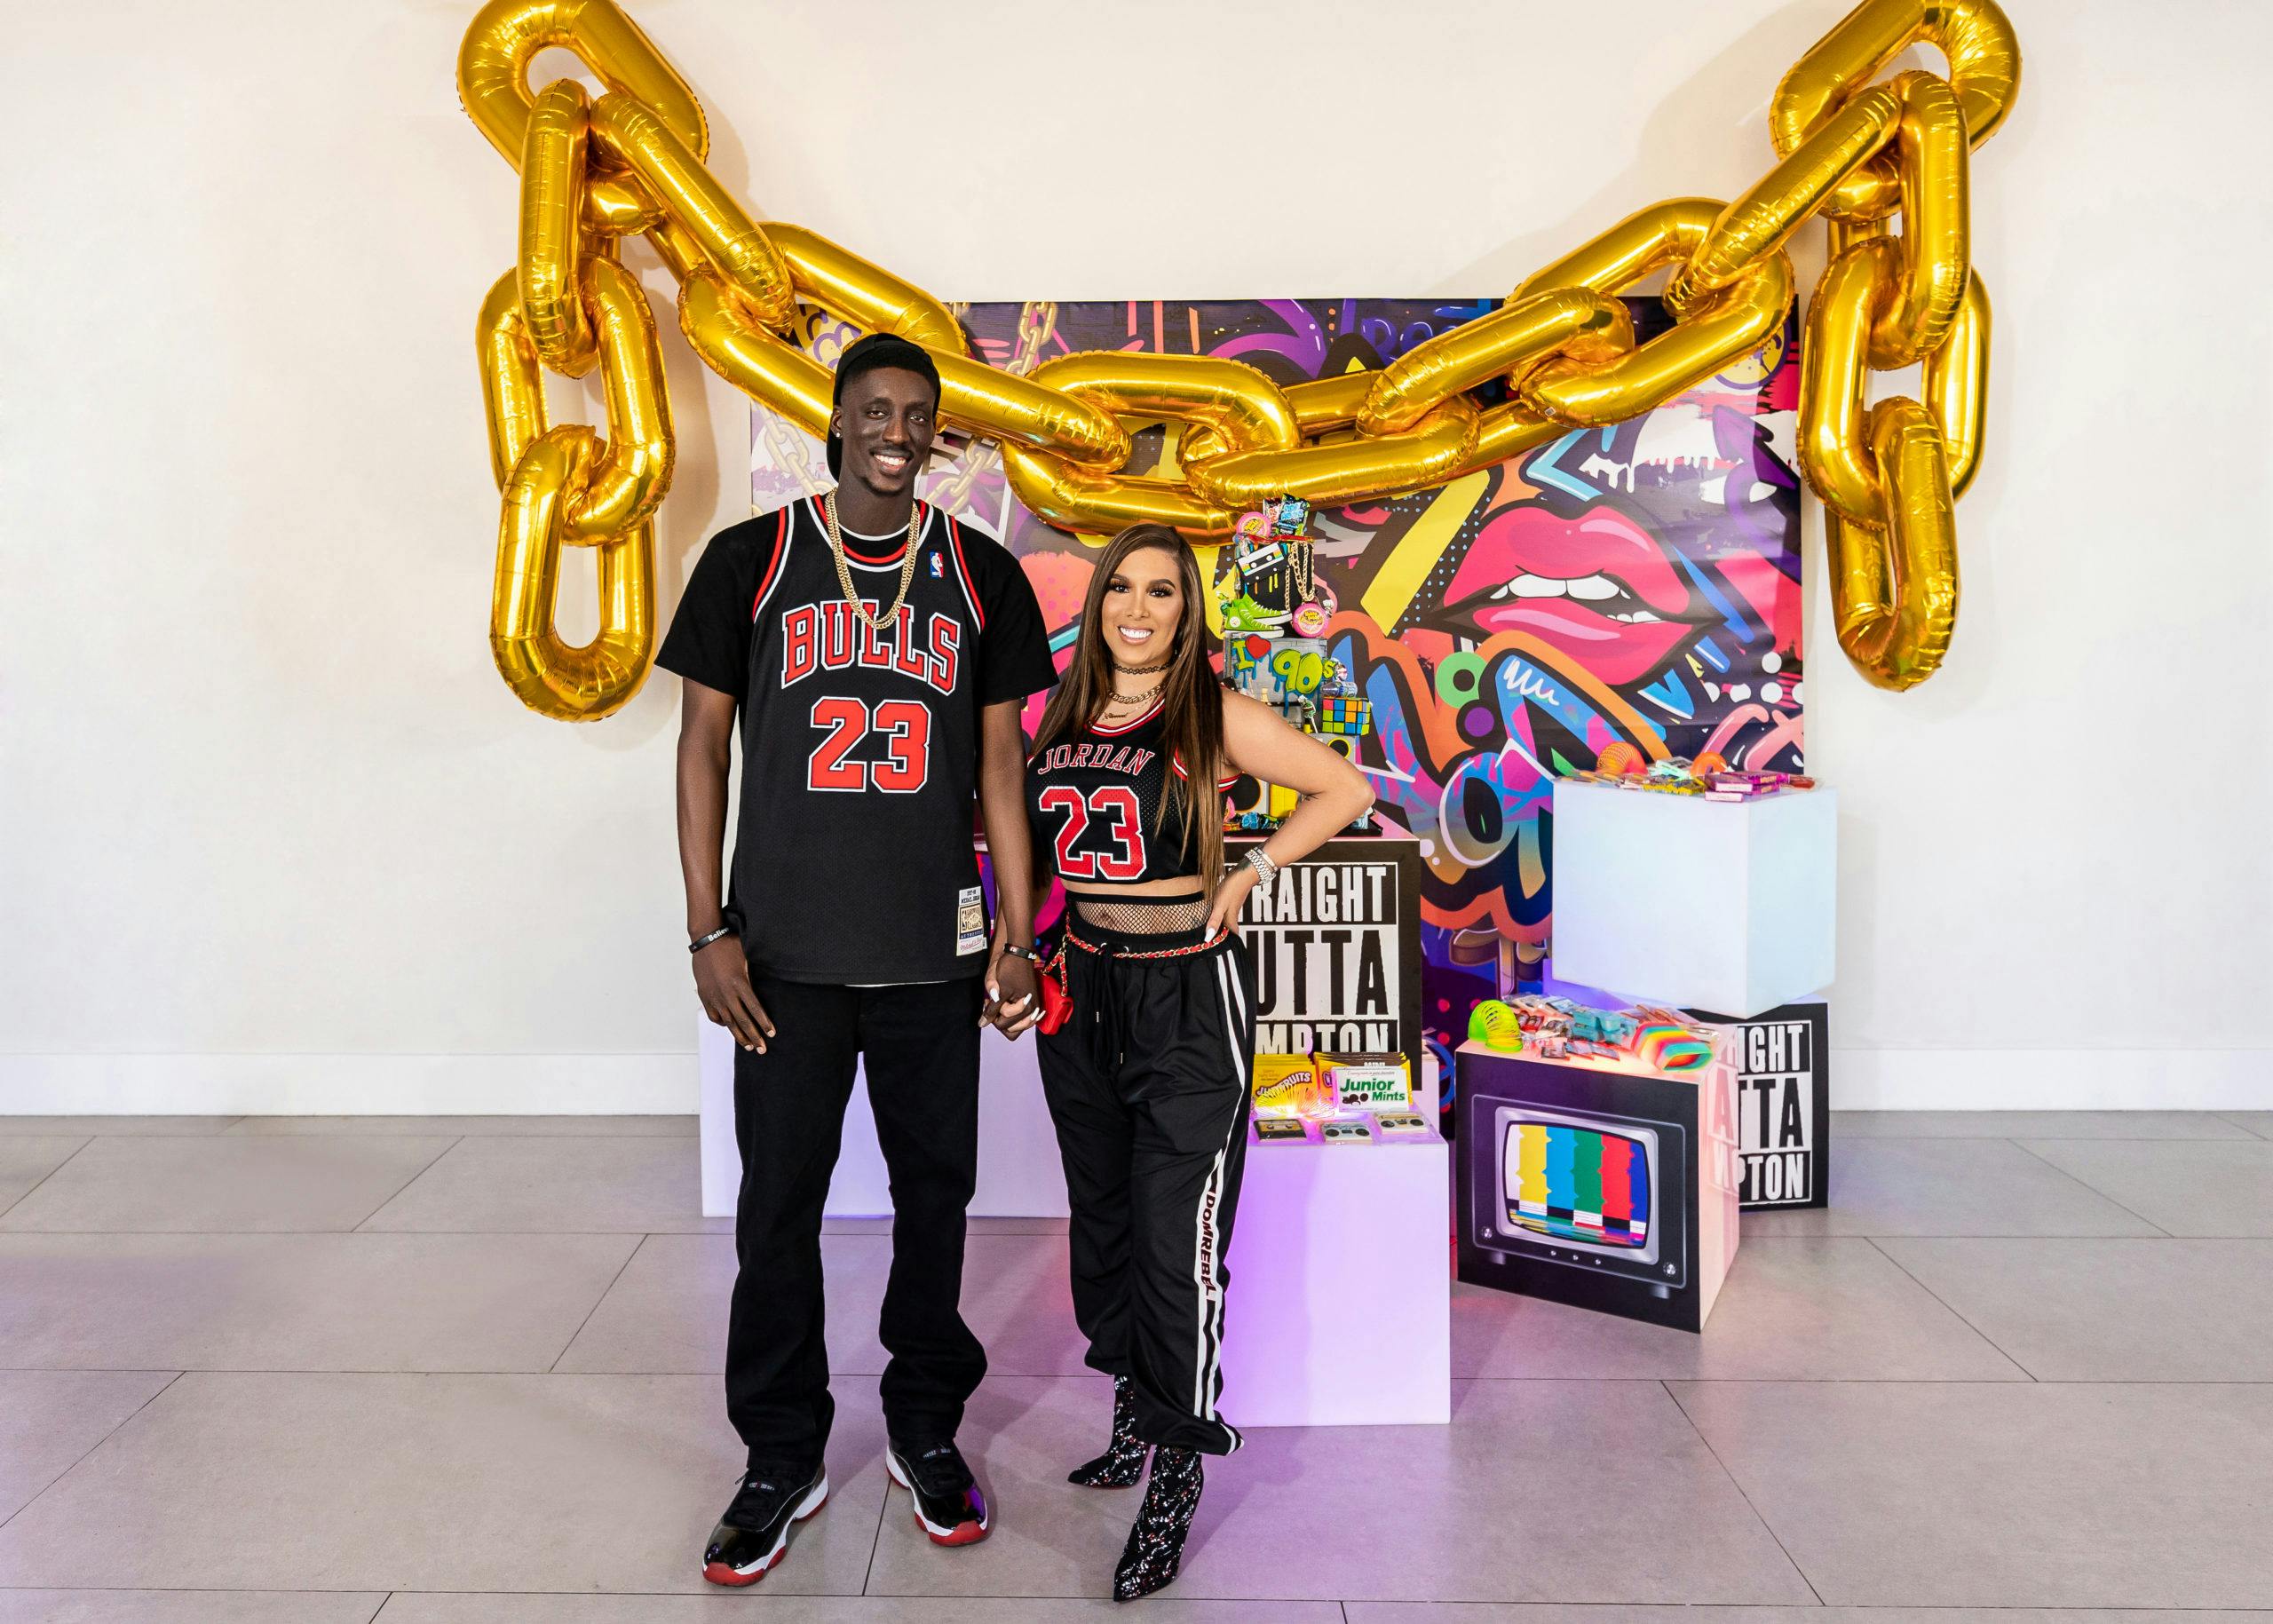 Stylish 90's Themed Welcome Party in Miami, Florida With Michaels Jordan Jerseys and Decor | PartySlate